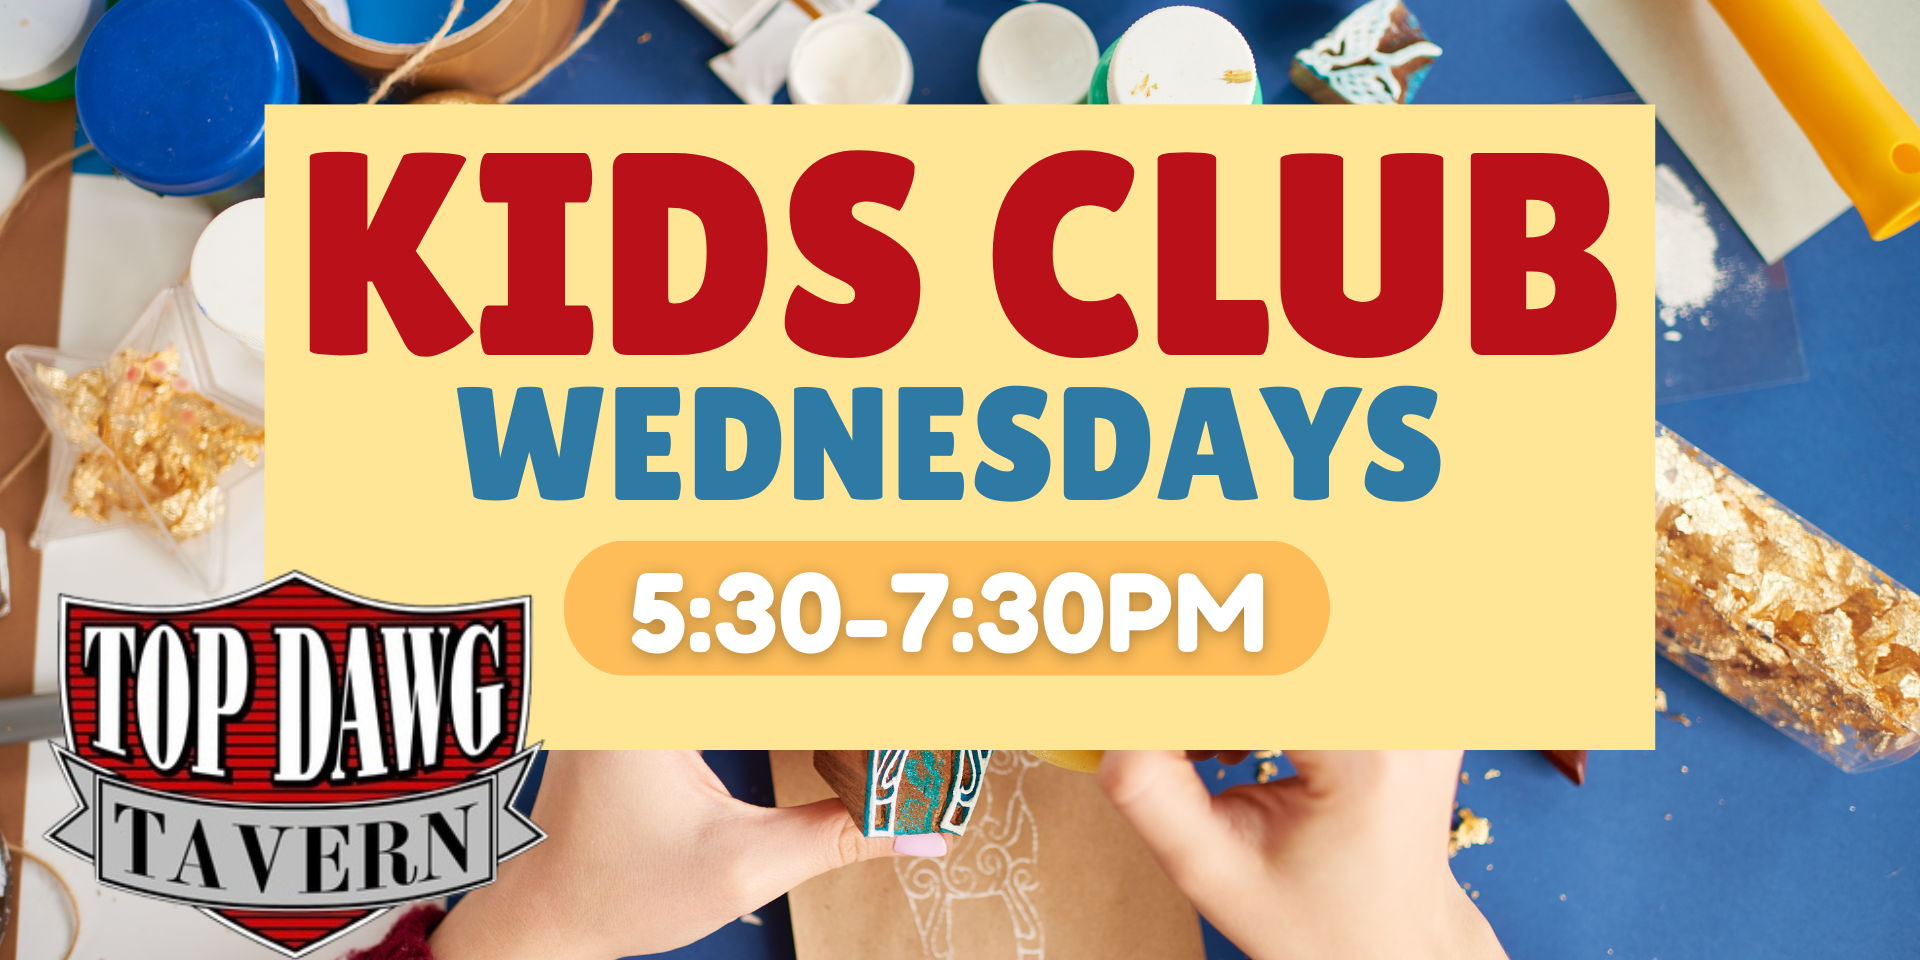 Kids Club at Top Dawg Tavern promotional image